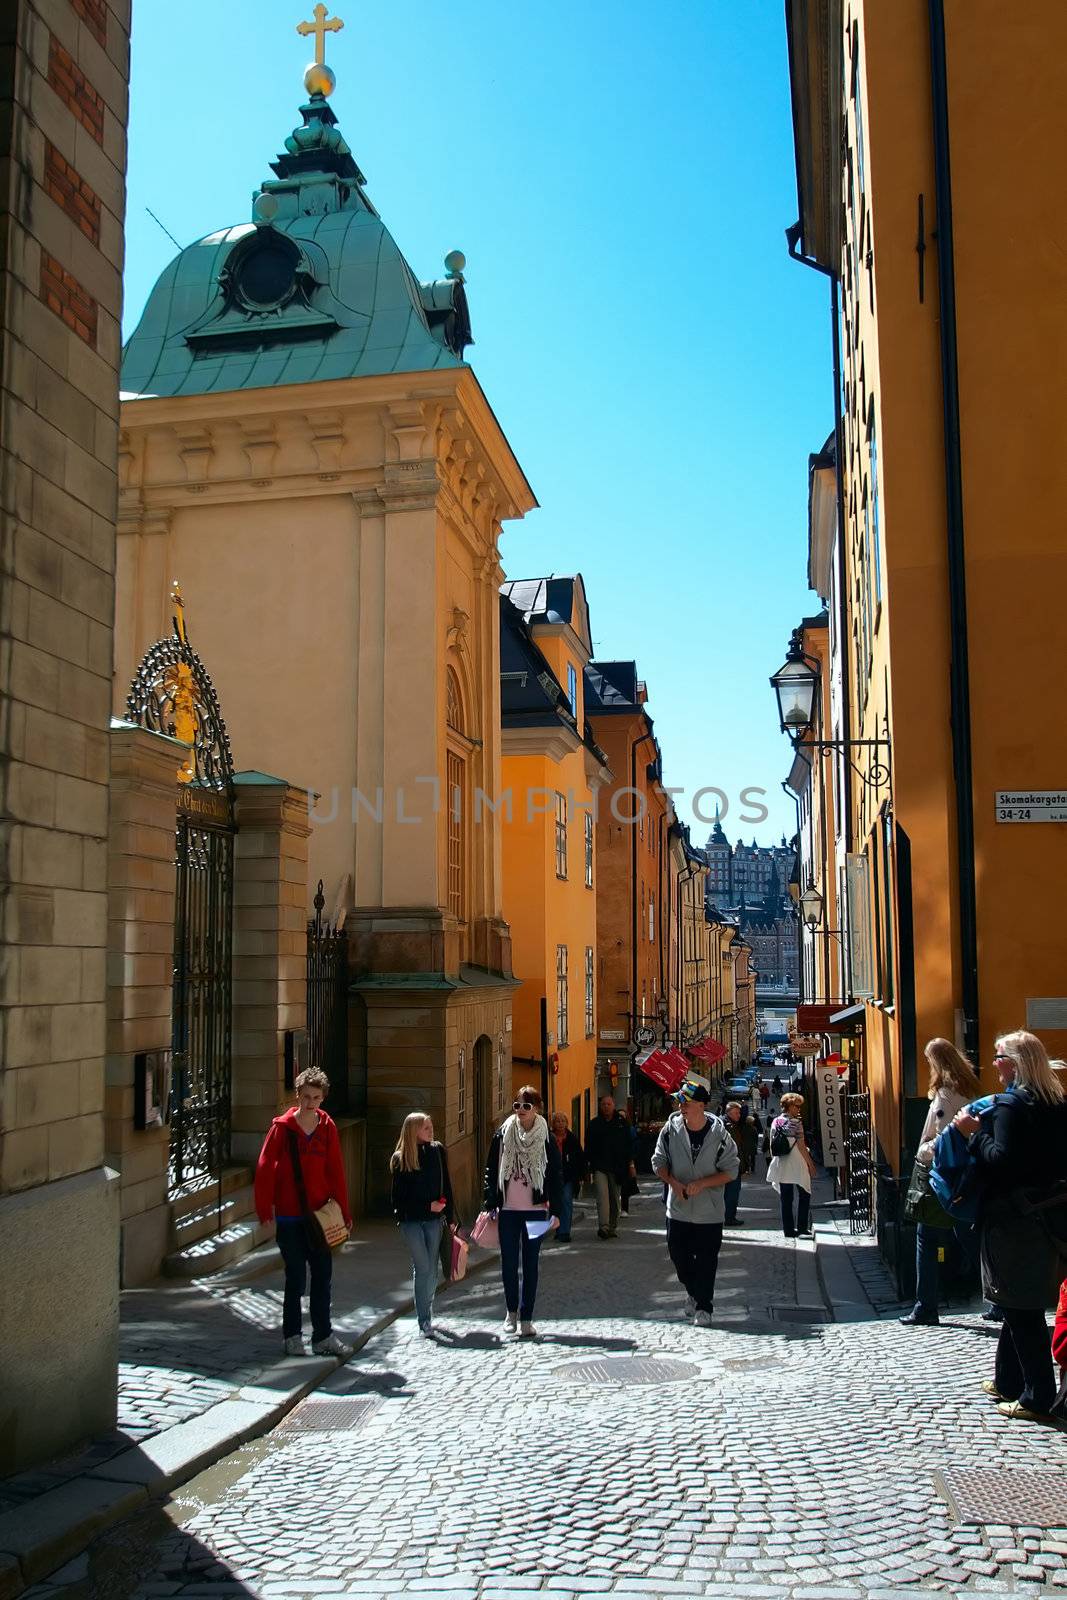 One of the main streets of the old town in Stockholm